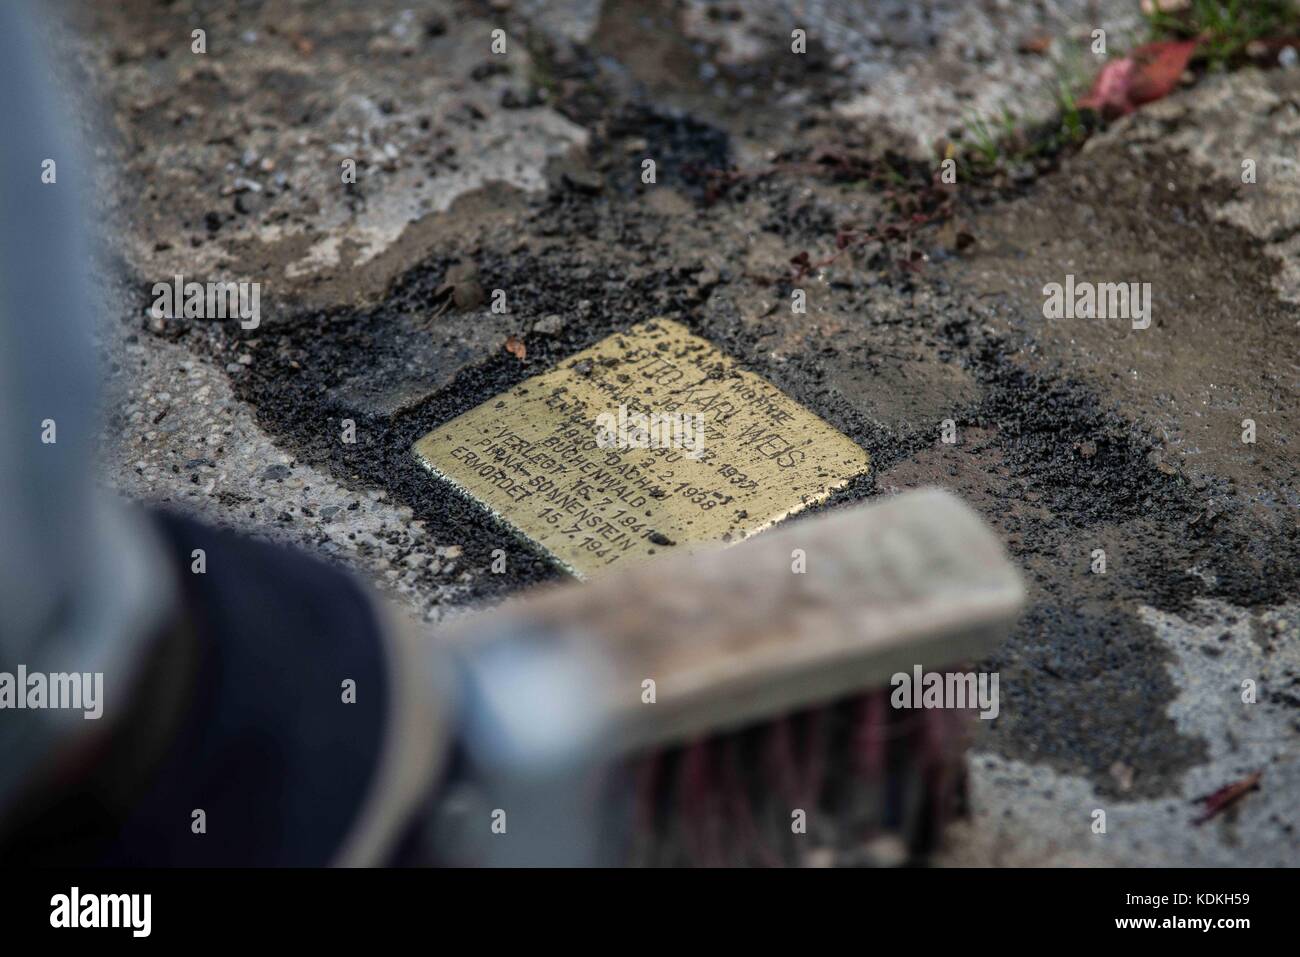 Munich, Bavaria, Germany. 14th Oct, 2017. Despite lengthy battles, the so-called Stolpersteine ('Stumbling Blocks'') containing the names & information of victims of National Socialism were installed at four different sites in Munich. The City of Munich forbid the installation of the memorial stones on public ground in 2015, which led the Stolpersteine Initiative (''˜Stumbling Block Initiative'') to seek private properties to install them. To date, 61,000 Stolpersteine in 2,000 cities in 21 countries have been dedicated, with much criticism lobbed against Munich's rejection due to Stock Photo